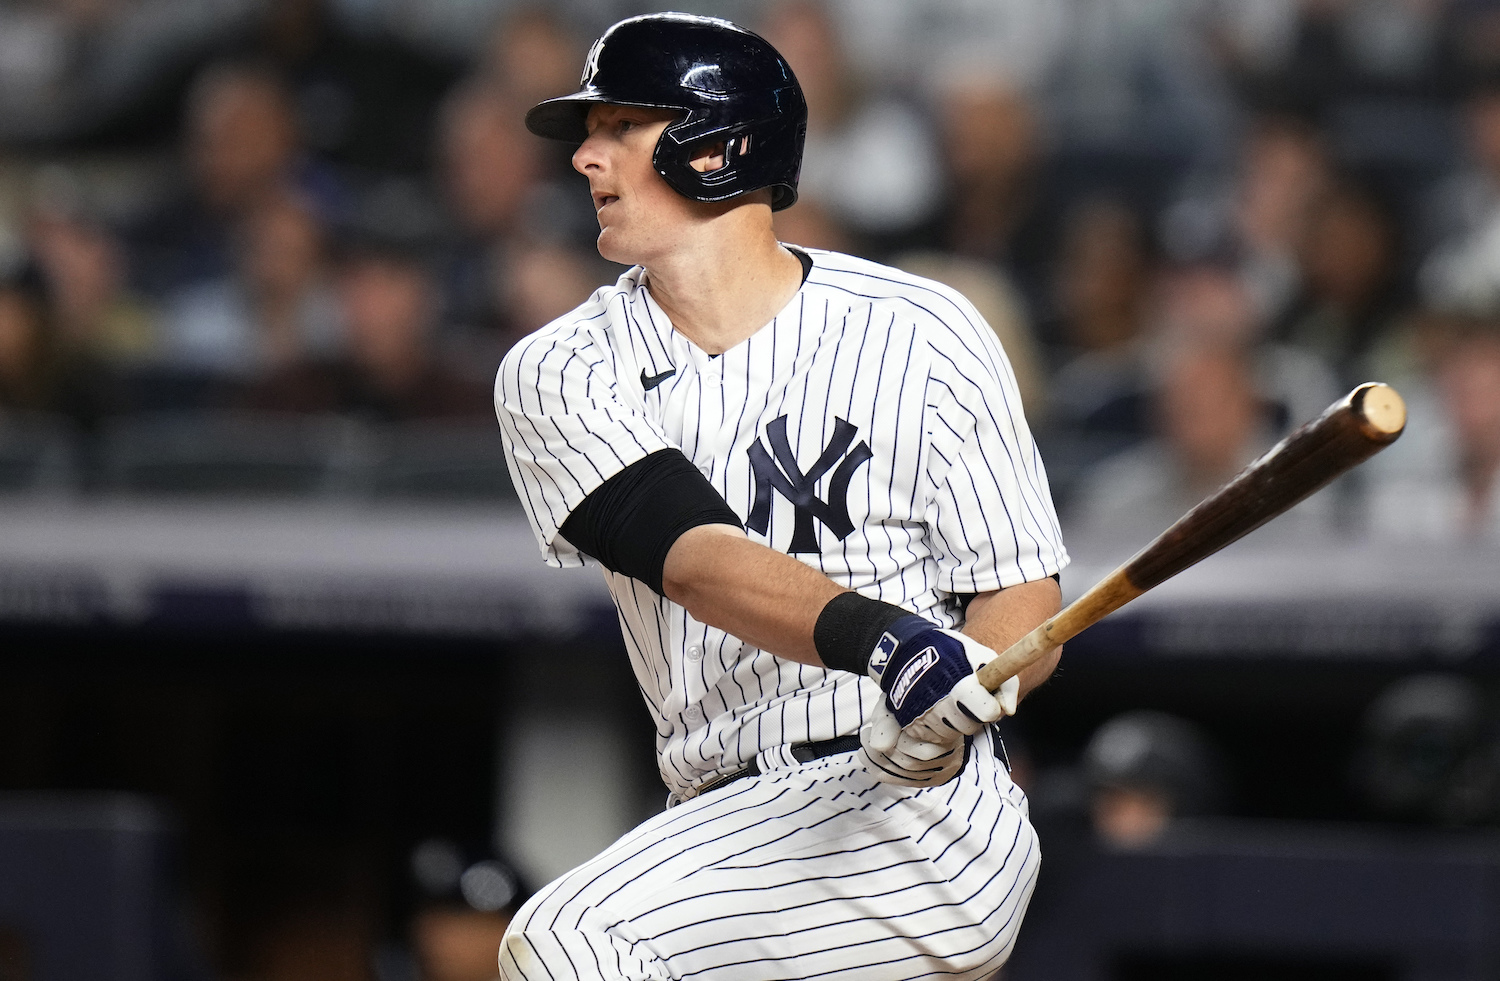 Yankees' DJ LeMahieu baffled he's slumping and whiffing with hard-hit rate  up, chase rate down 